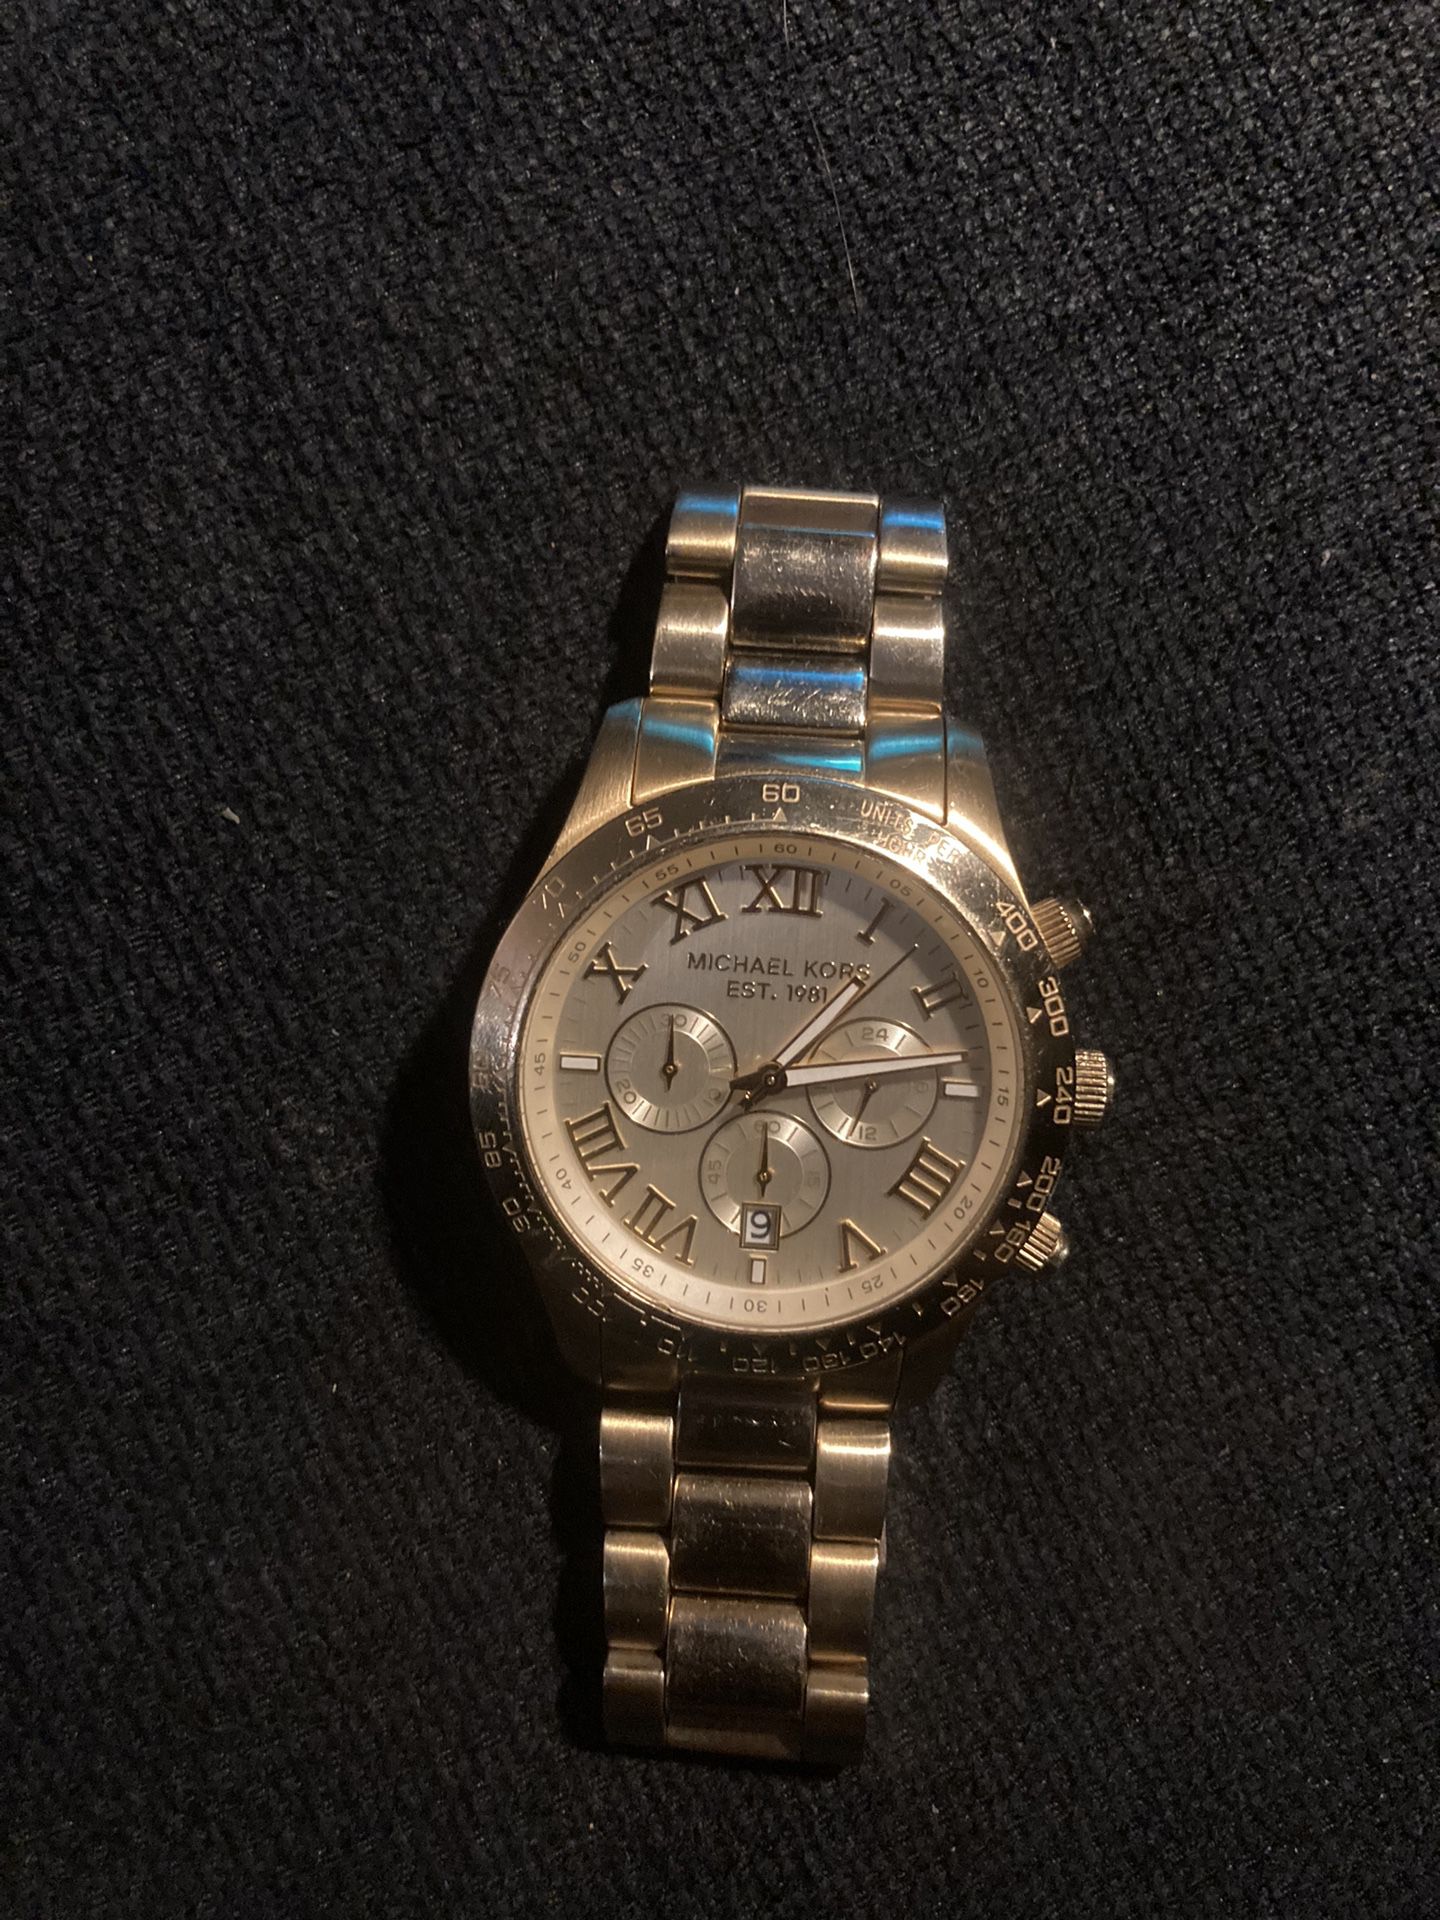 MK Watch REAL $250 OBO 